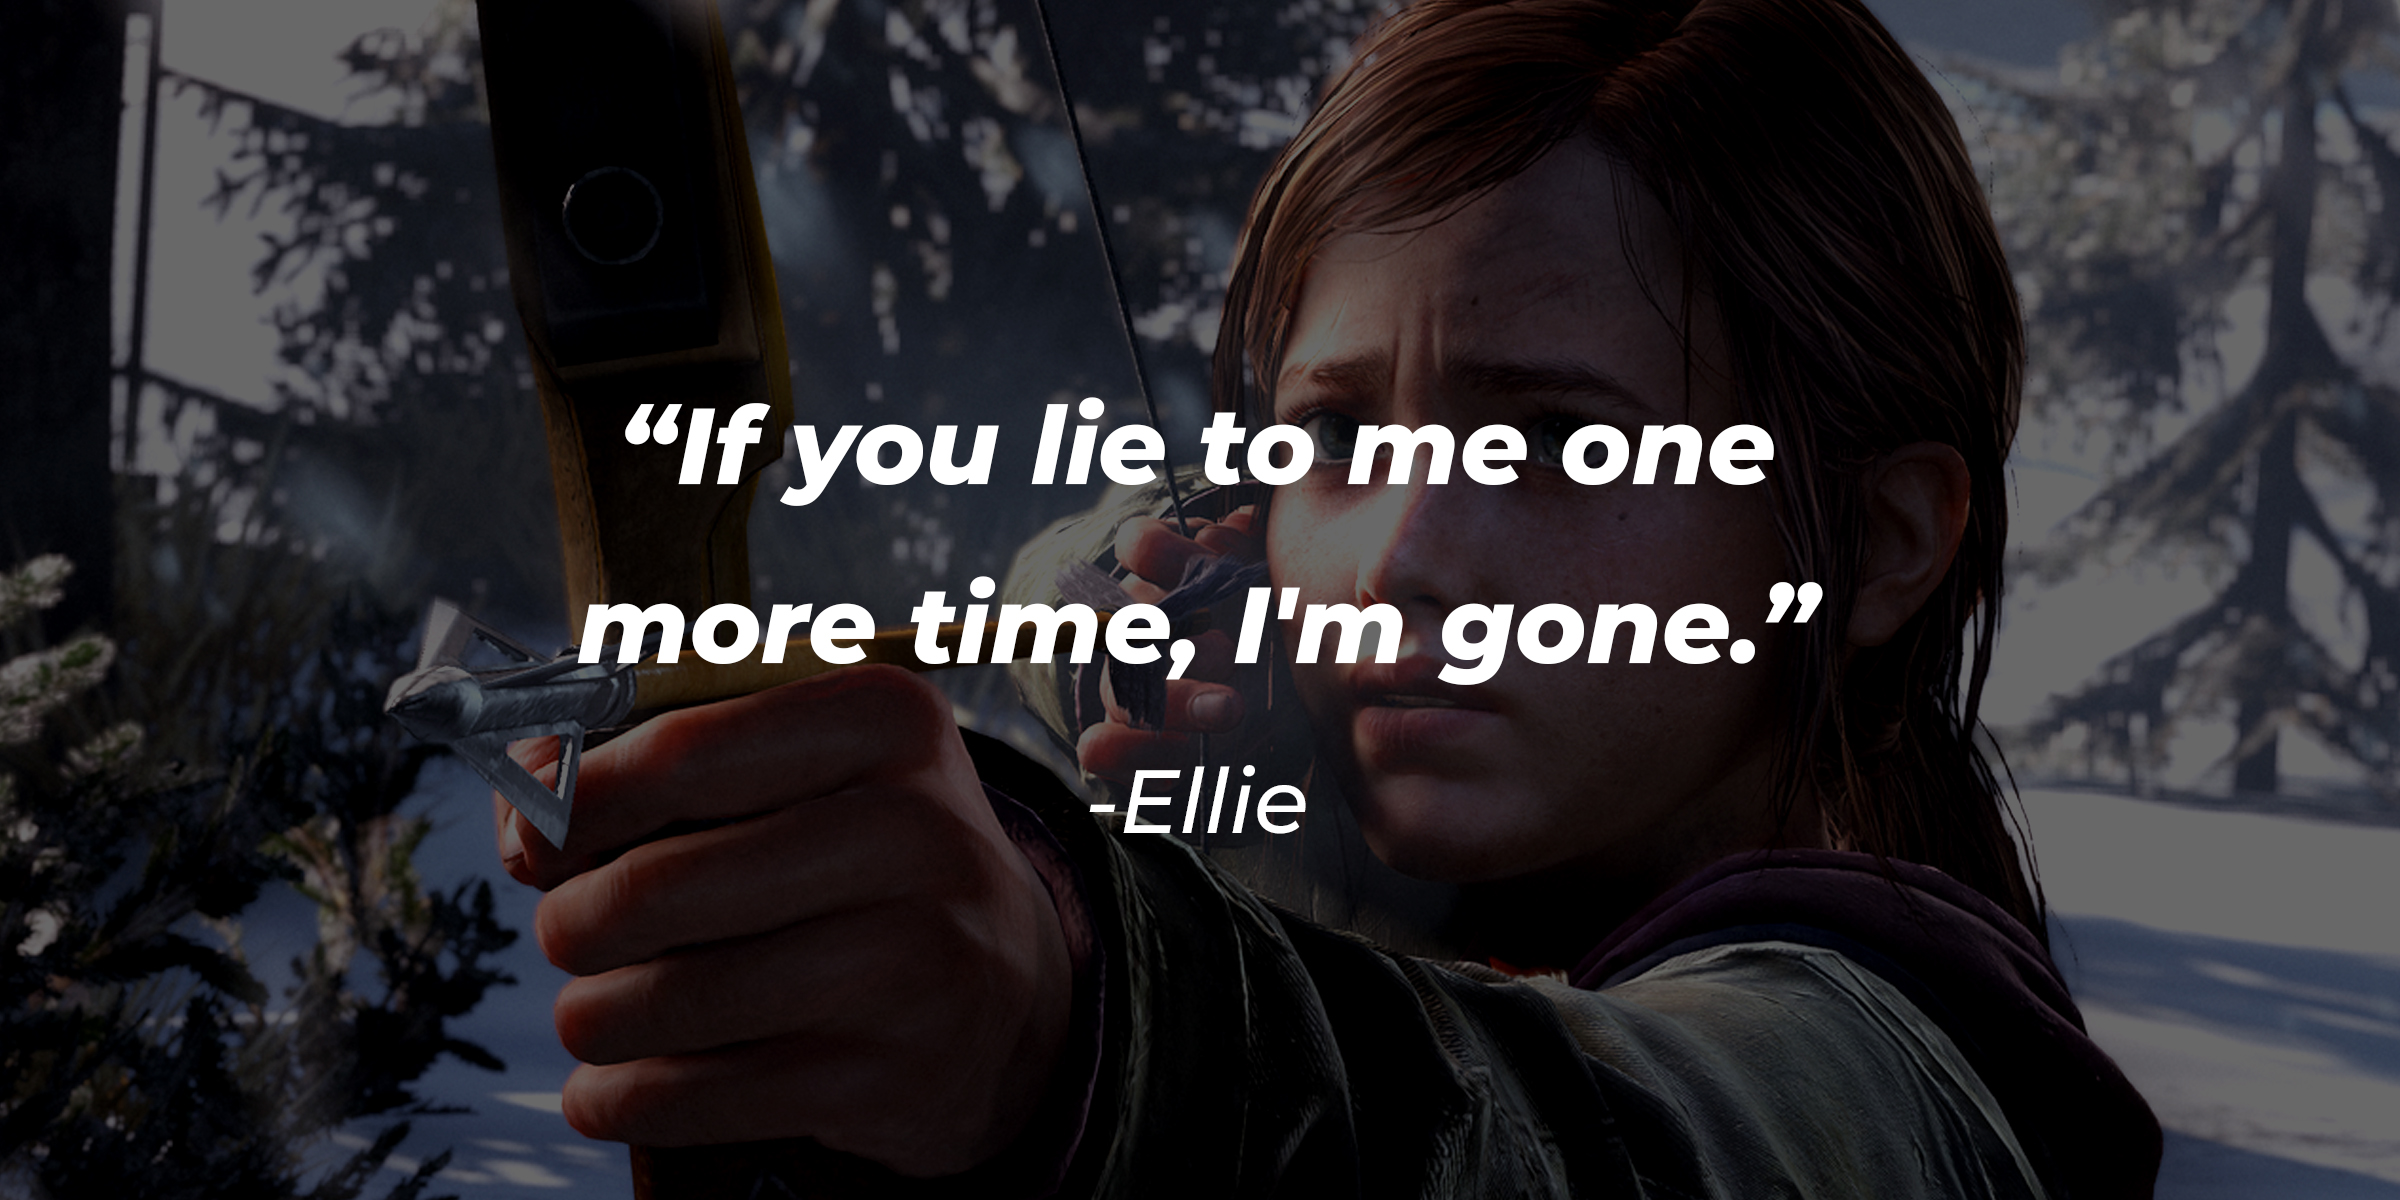 An image of Ellie, with her quote: "If you lie to me one more time, I'm gone.” | Source: Facebook.com/TLOUPS